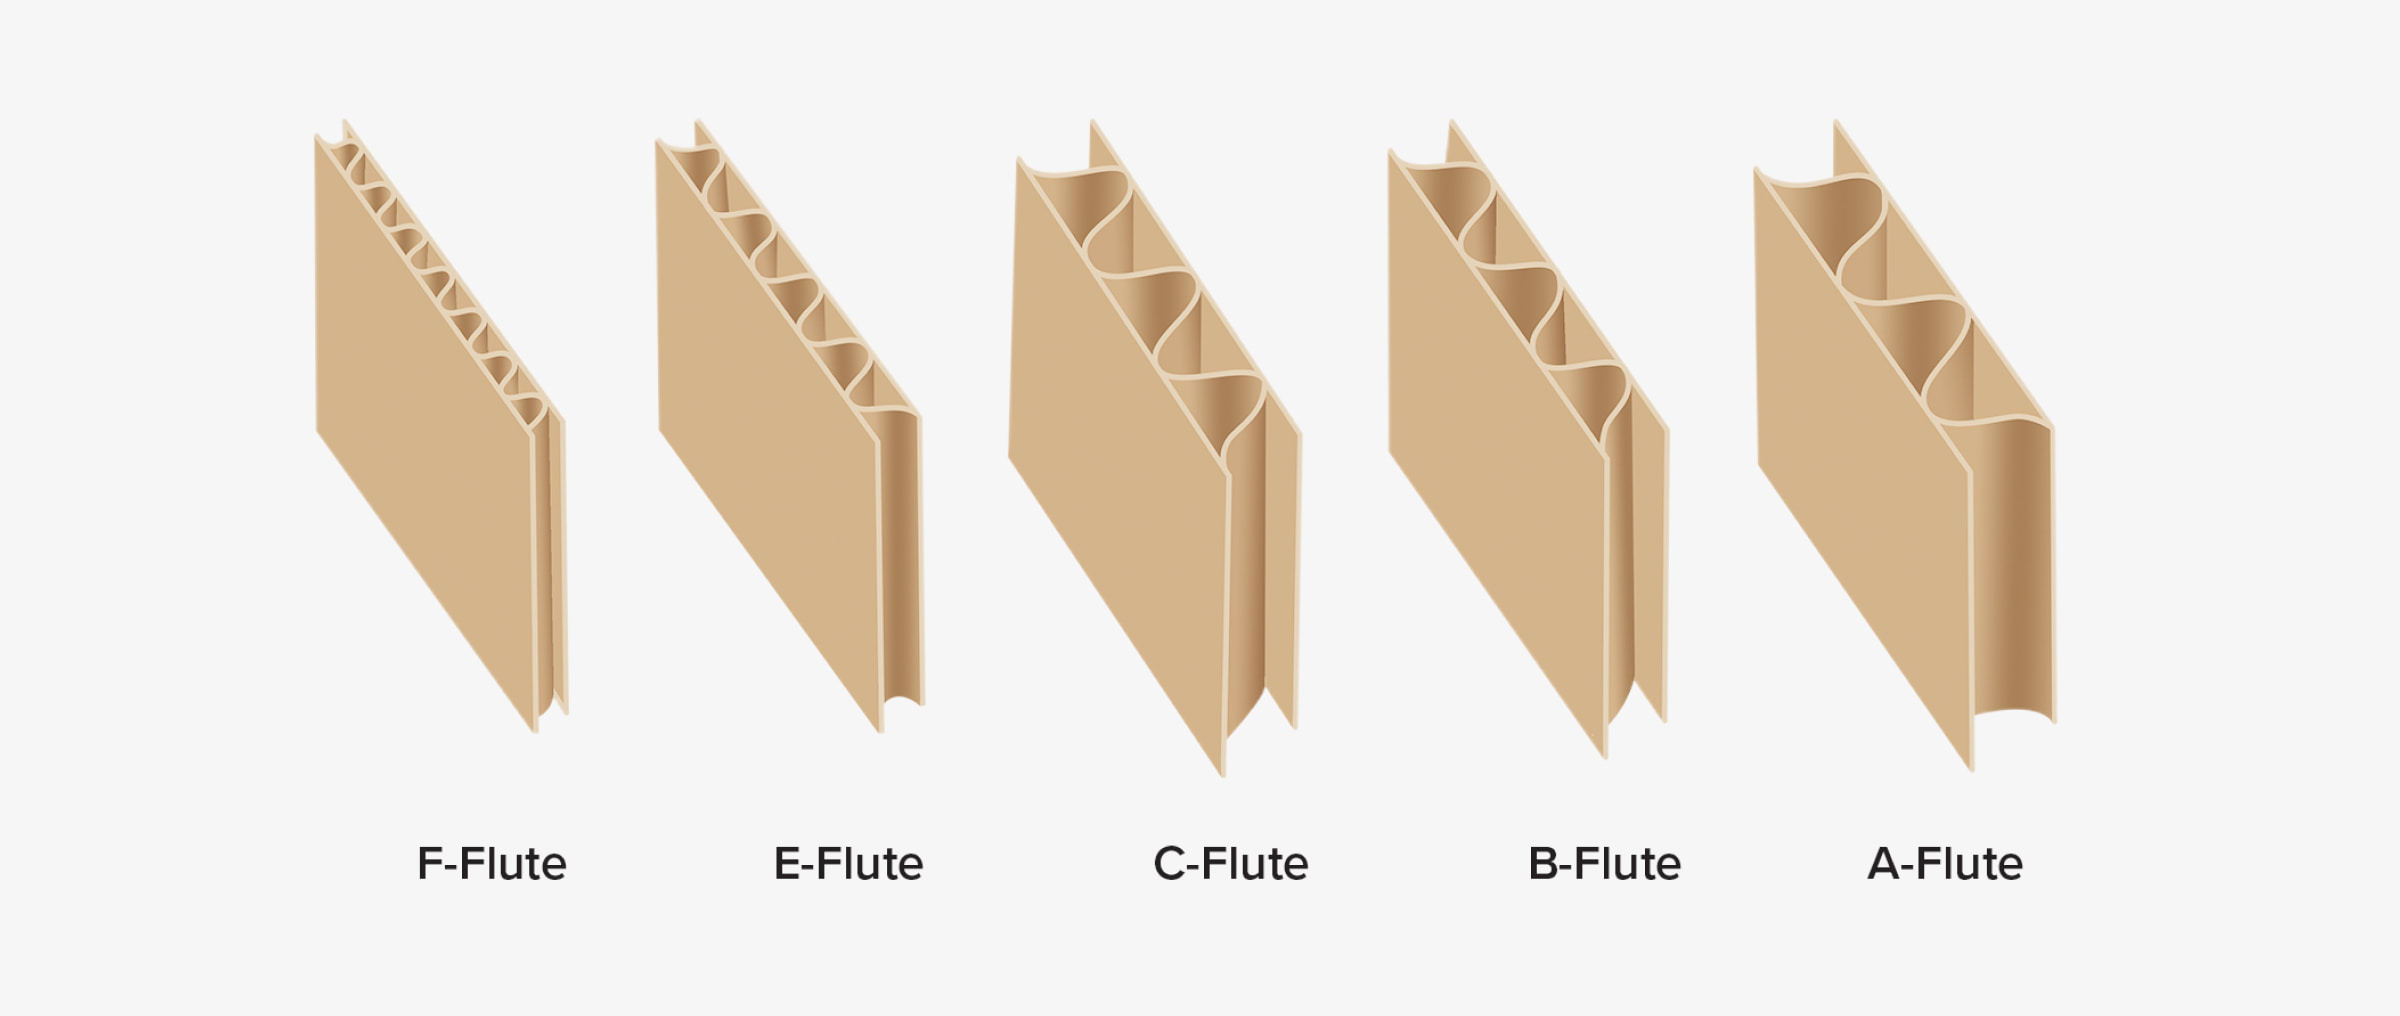 corrugated boards thickness in flutes